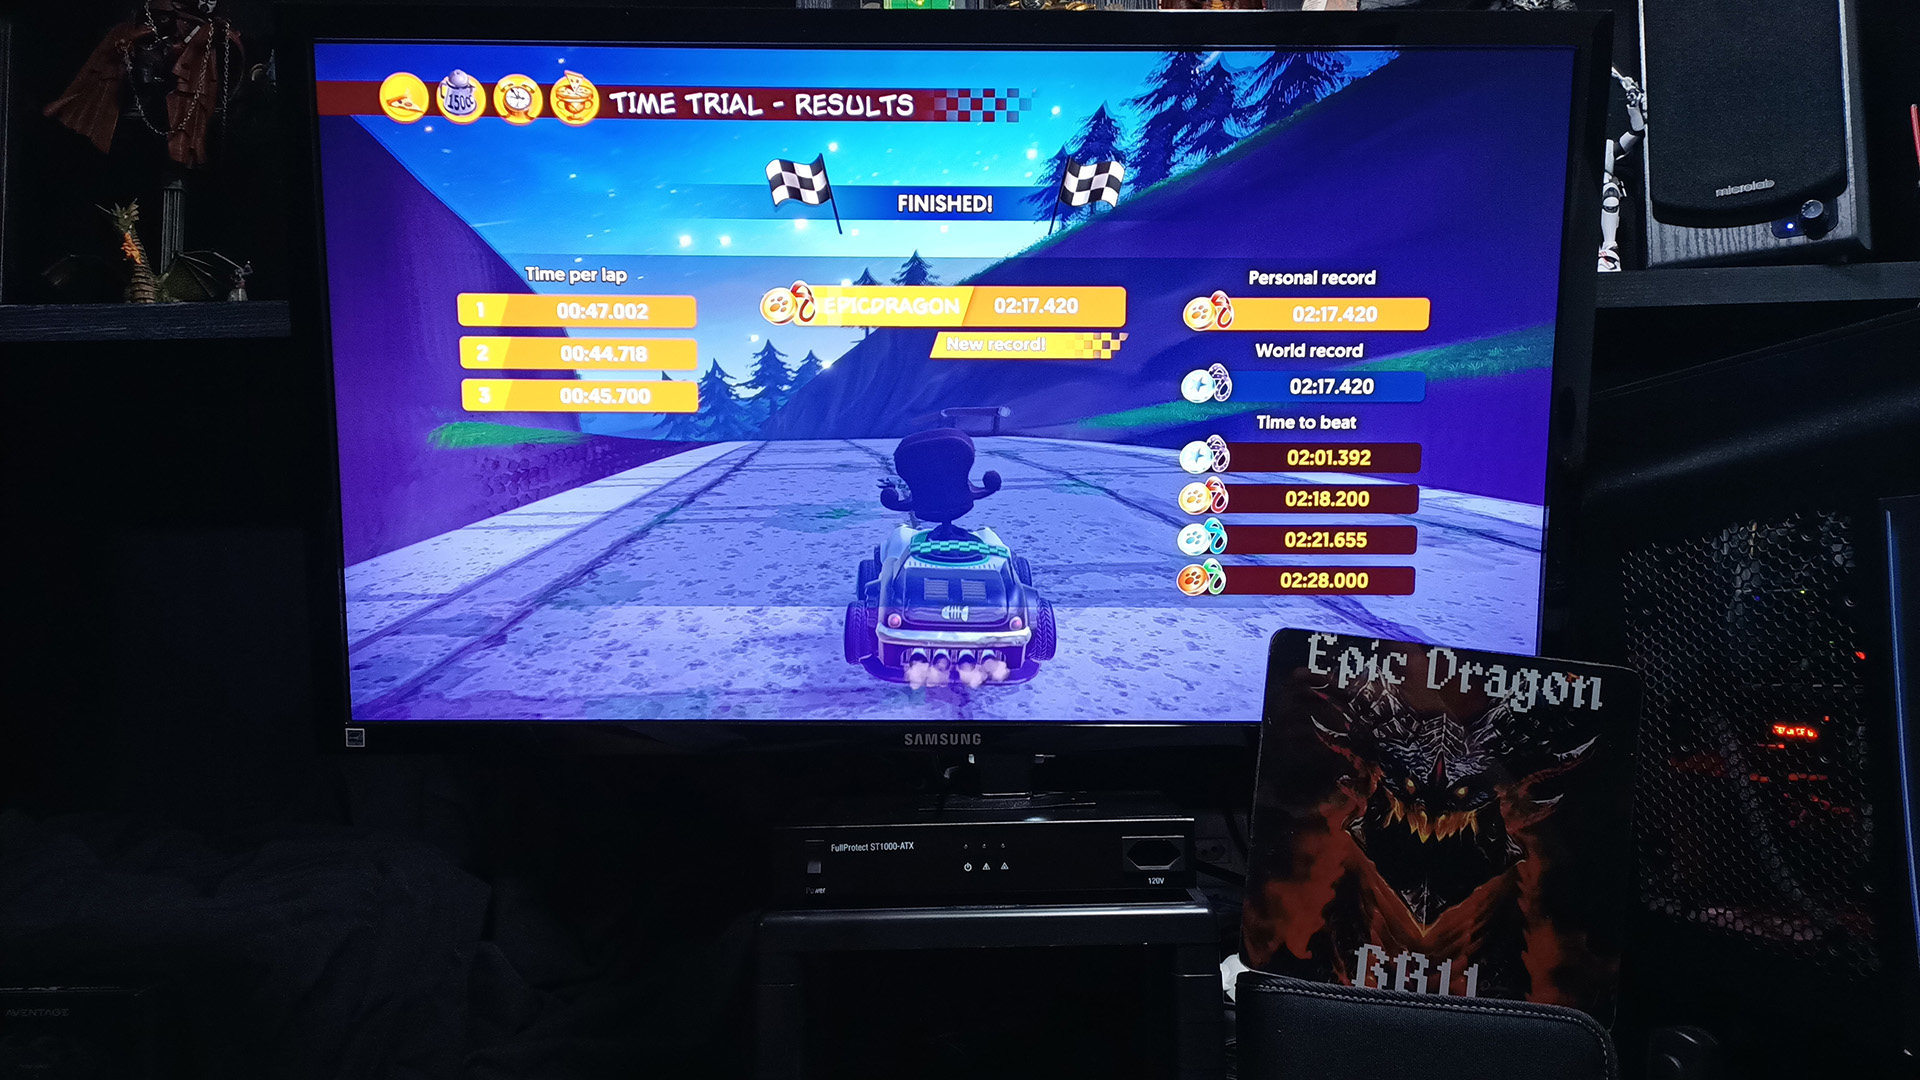 Garfield Kart Furious Racing: Spooky Manor [Time Trial: 3 Laps] time of 0:02:17.42